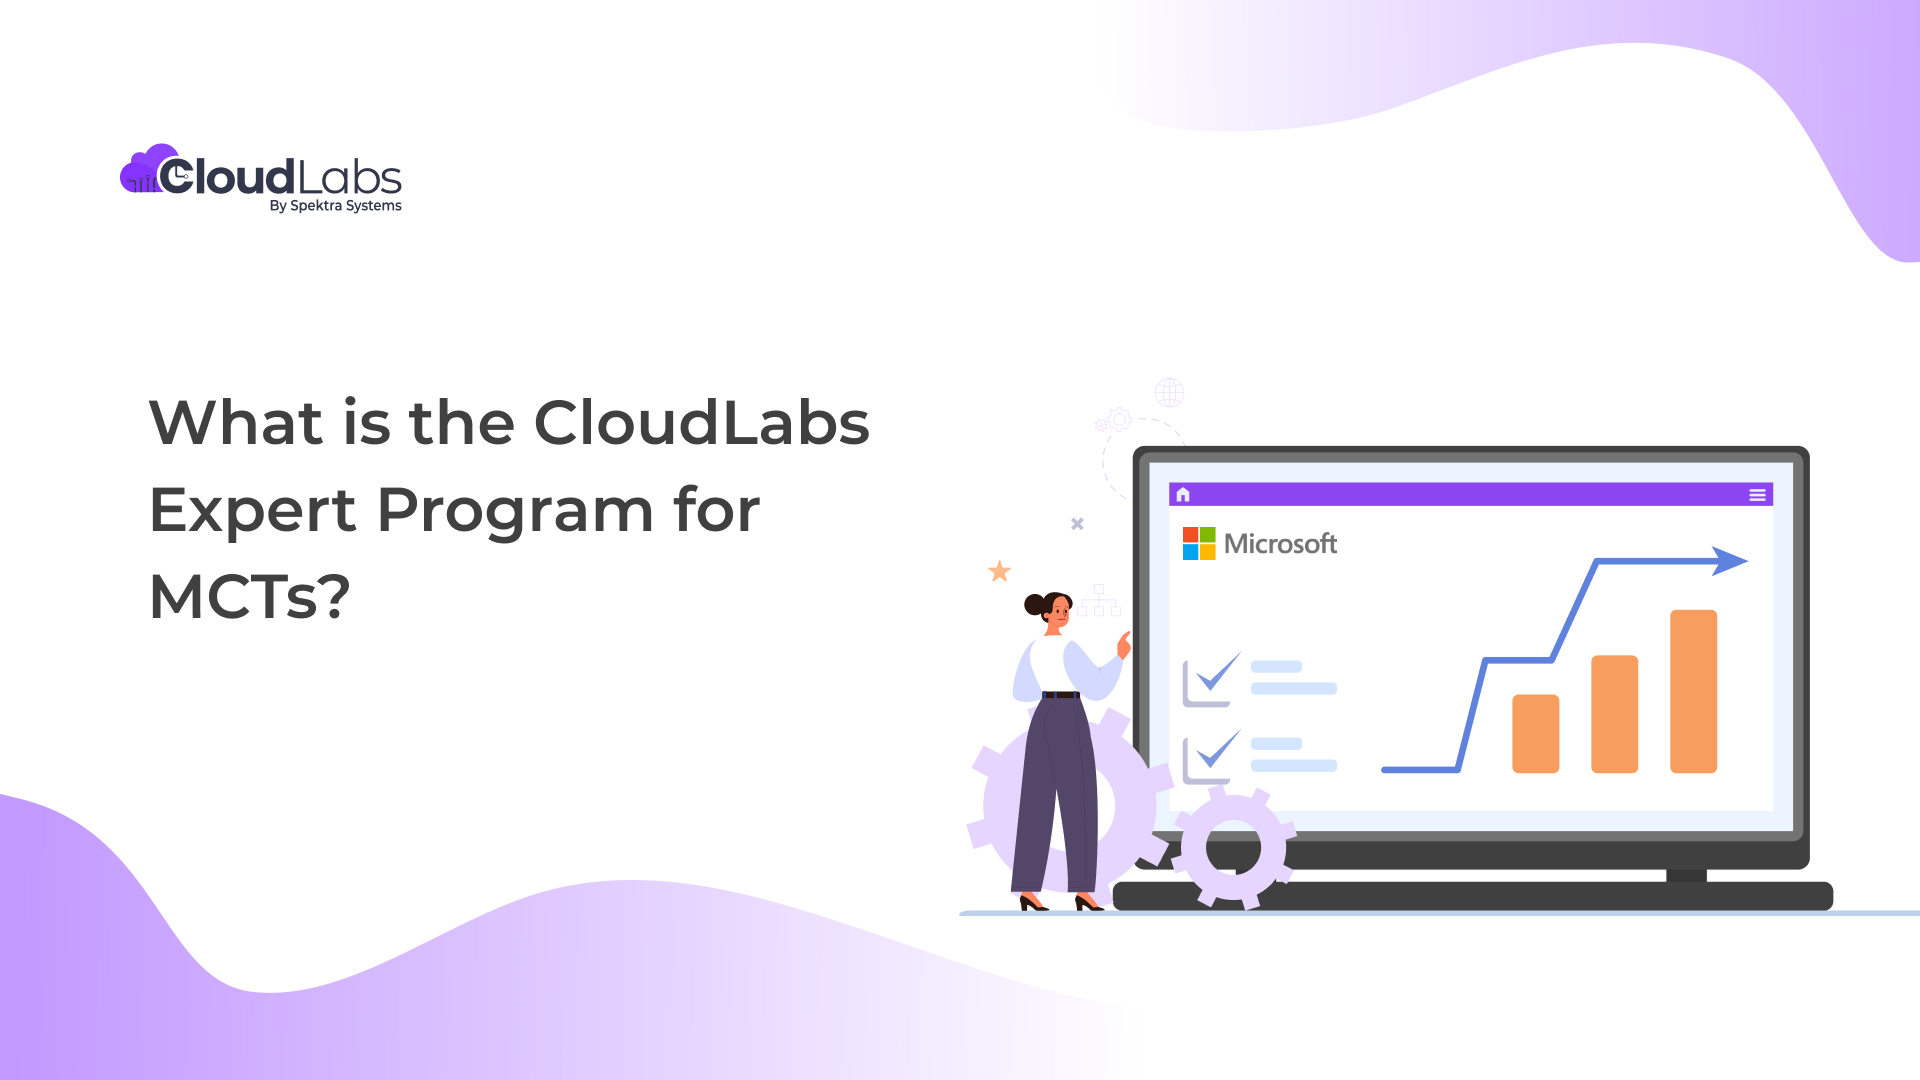 What is the CloudLabs Expert Program for MCTs?